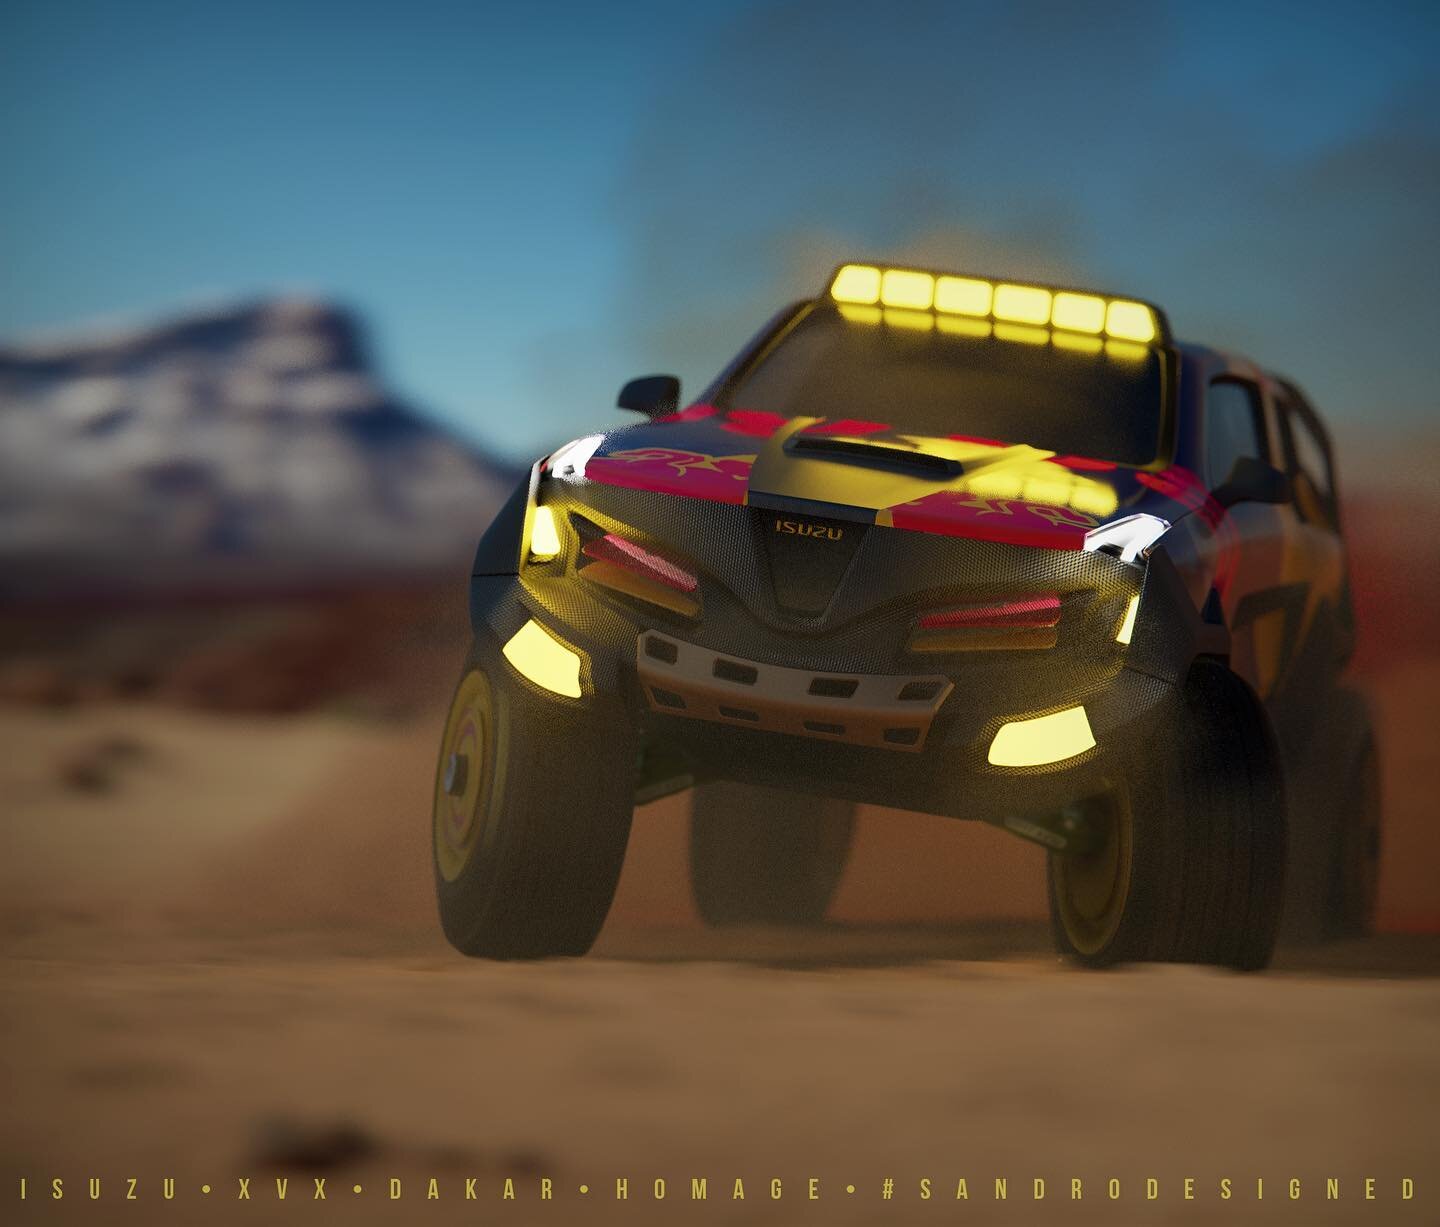 Well, best for last: went back into Keyshot and banged out some action shots for the XVX Dakar, with all the motion blurs and dusts rendered within the environment instead of later in Photoshop. Very pleased w the results. Looking forward to 2023!
&b